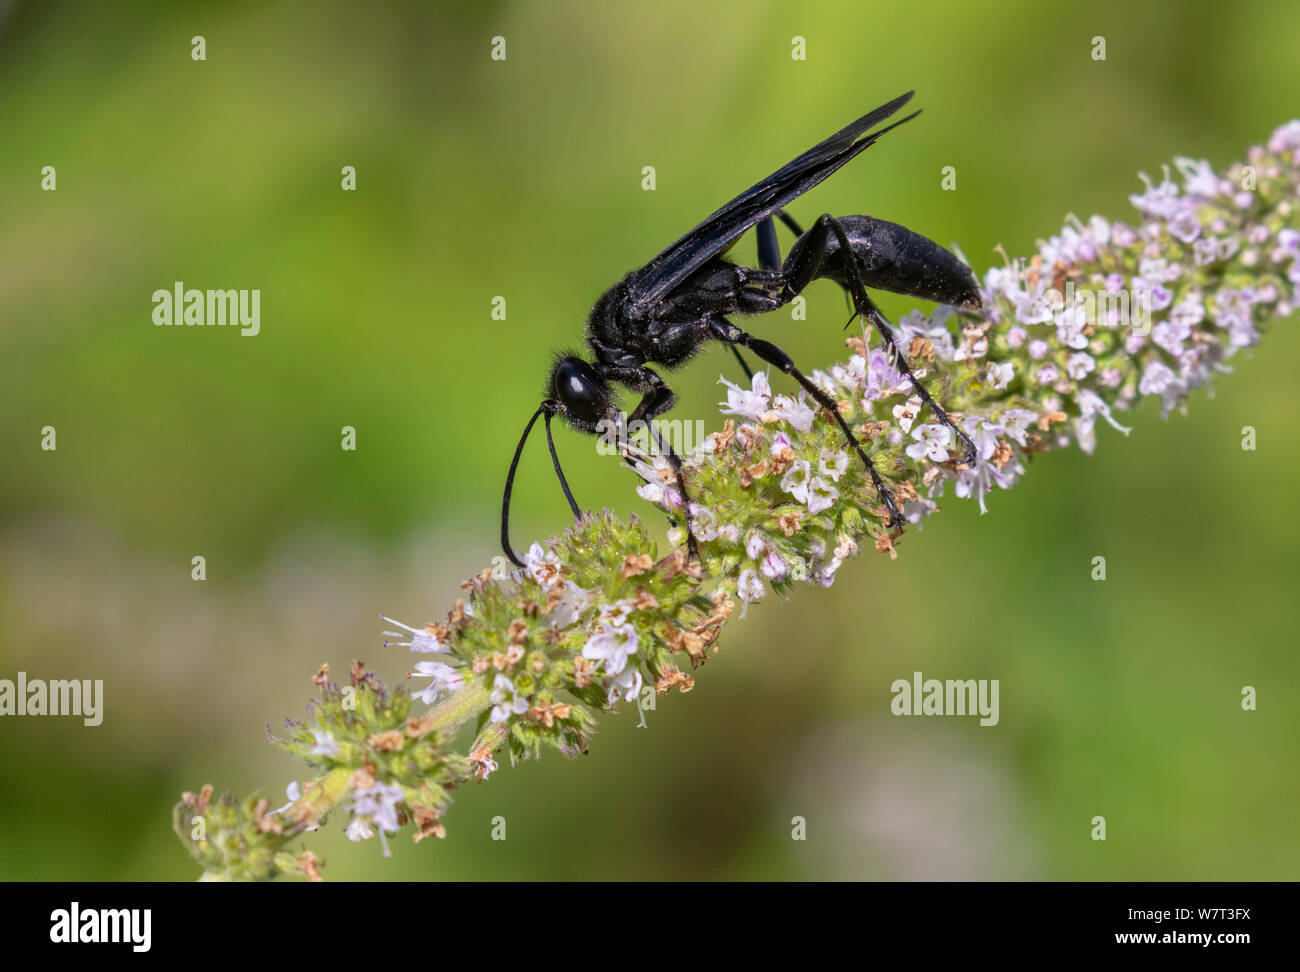 Great black wasp (Sphex pensylvanicus) eating nectar and pollinating mint flowers, Iowa, USA. Stock Photo